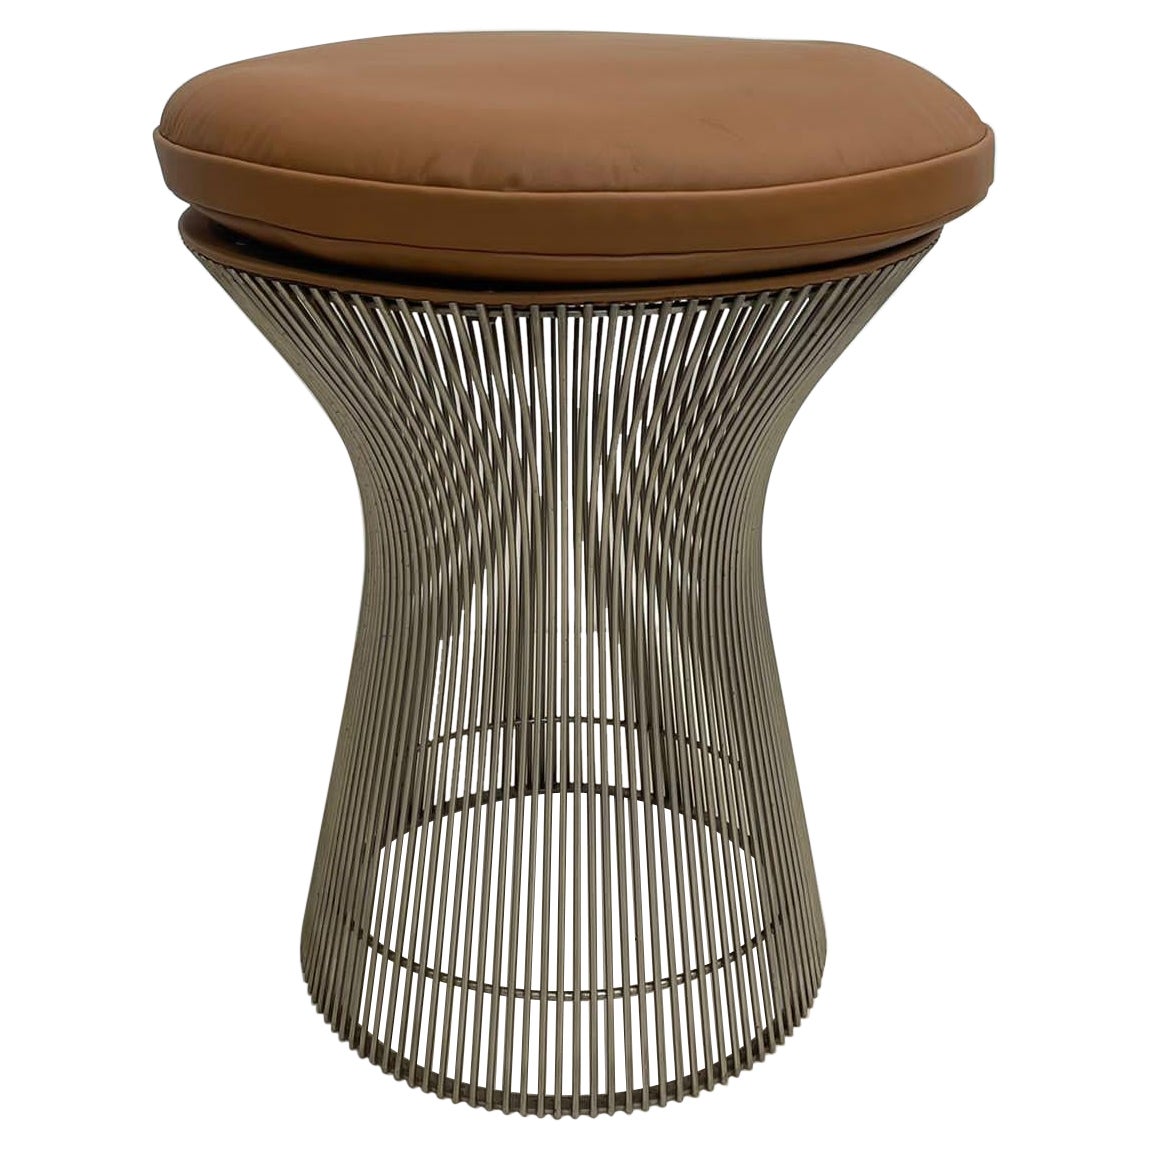 Warren Platner Wire Stools for Knoll, 1960s, 5 Available